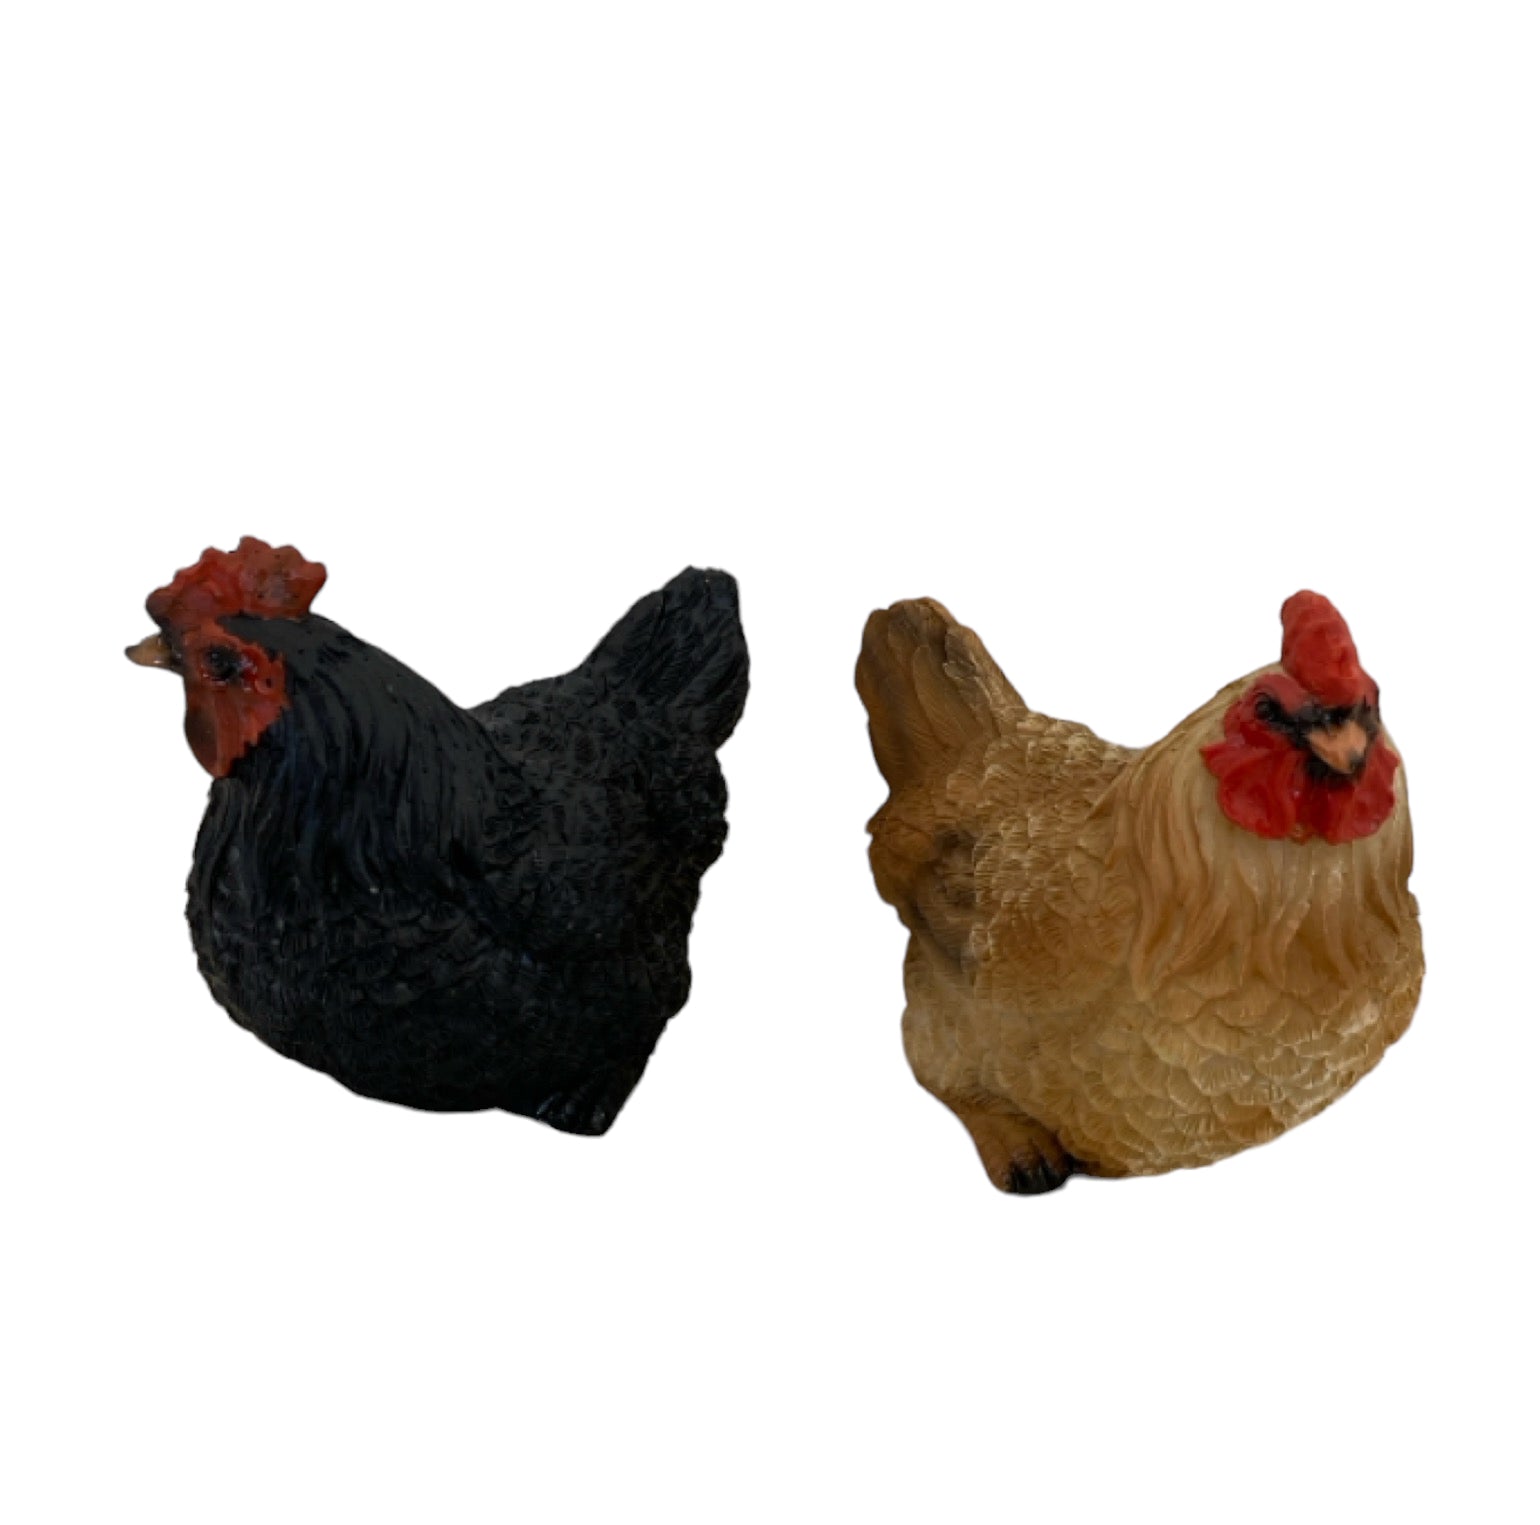 Chicken Hen Farm 7cm Set of 2 Ornament - The Renmy Store Homewares & Gifts 